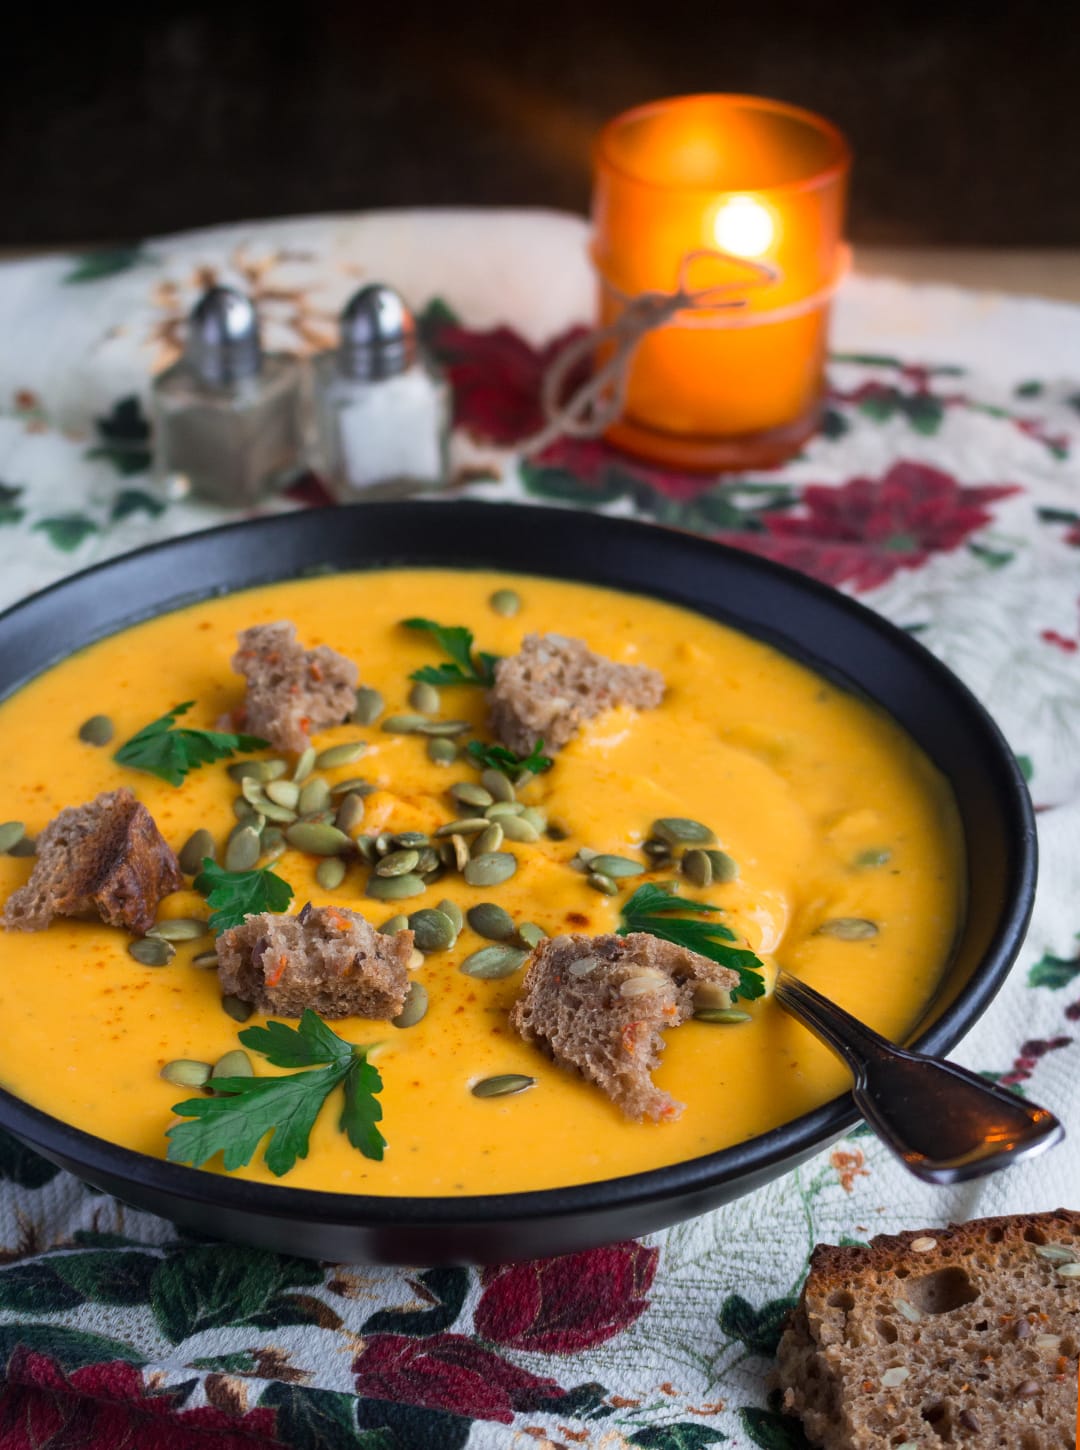 Vegan Creamy Roasted Butternut Squash Soup - delicious and easy fall recipe and the ultime comfort food! It's freezer friendly so you can double the recipe to enjoy it later. | thehealthfulideas.com